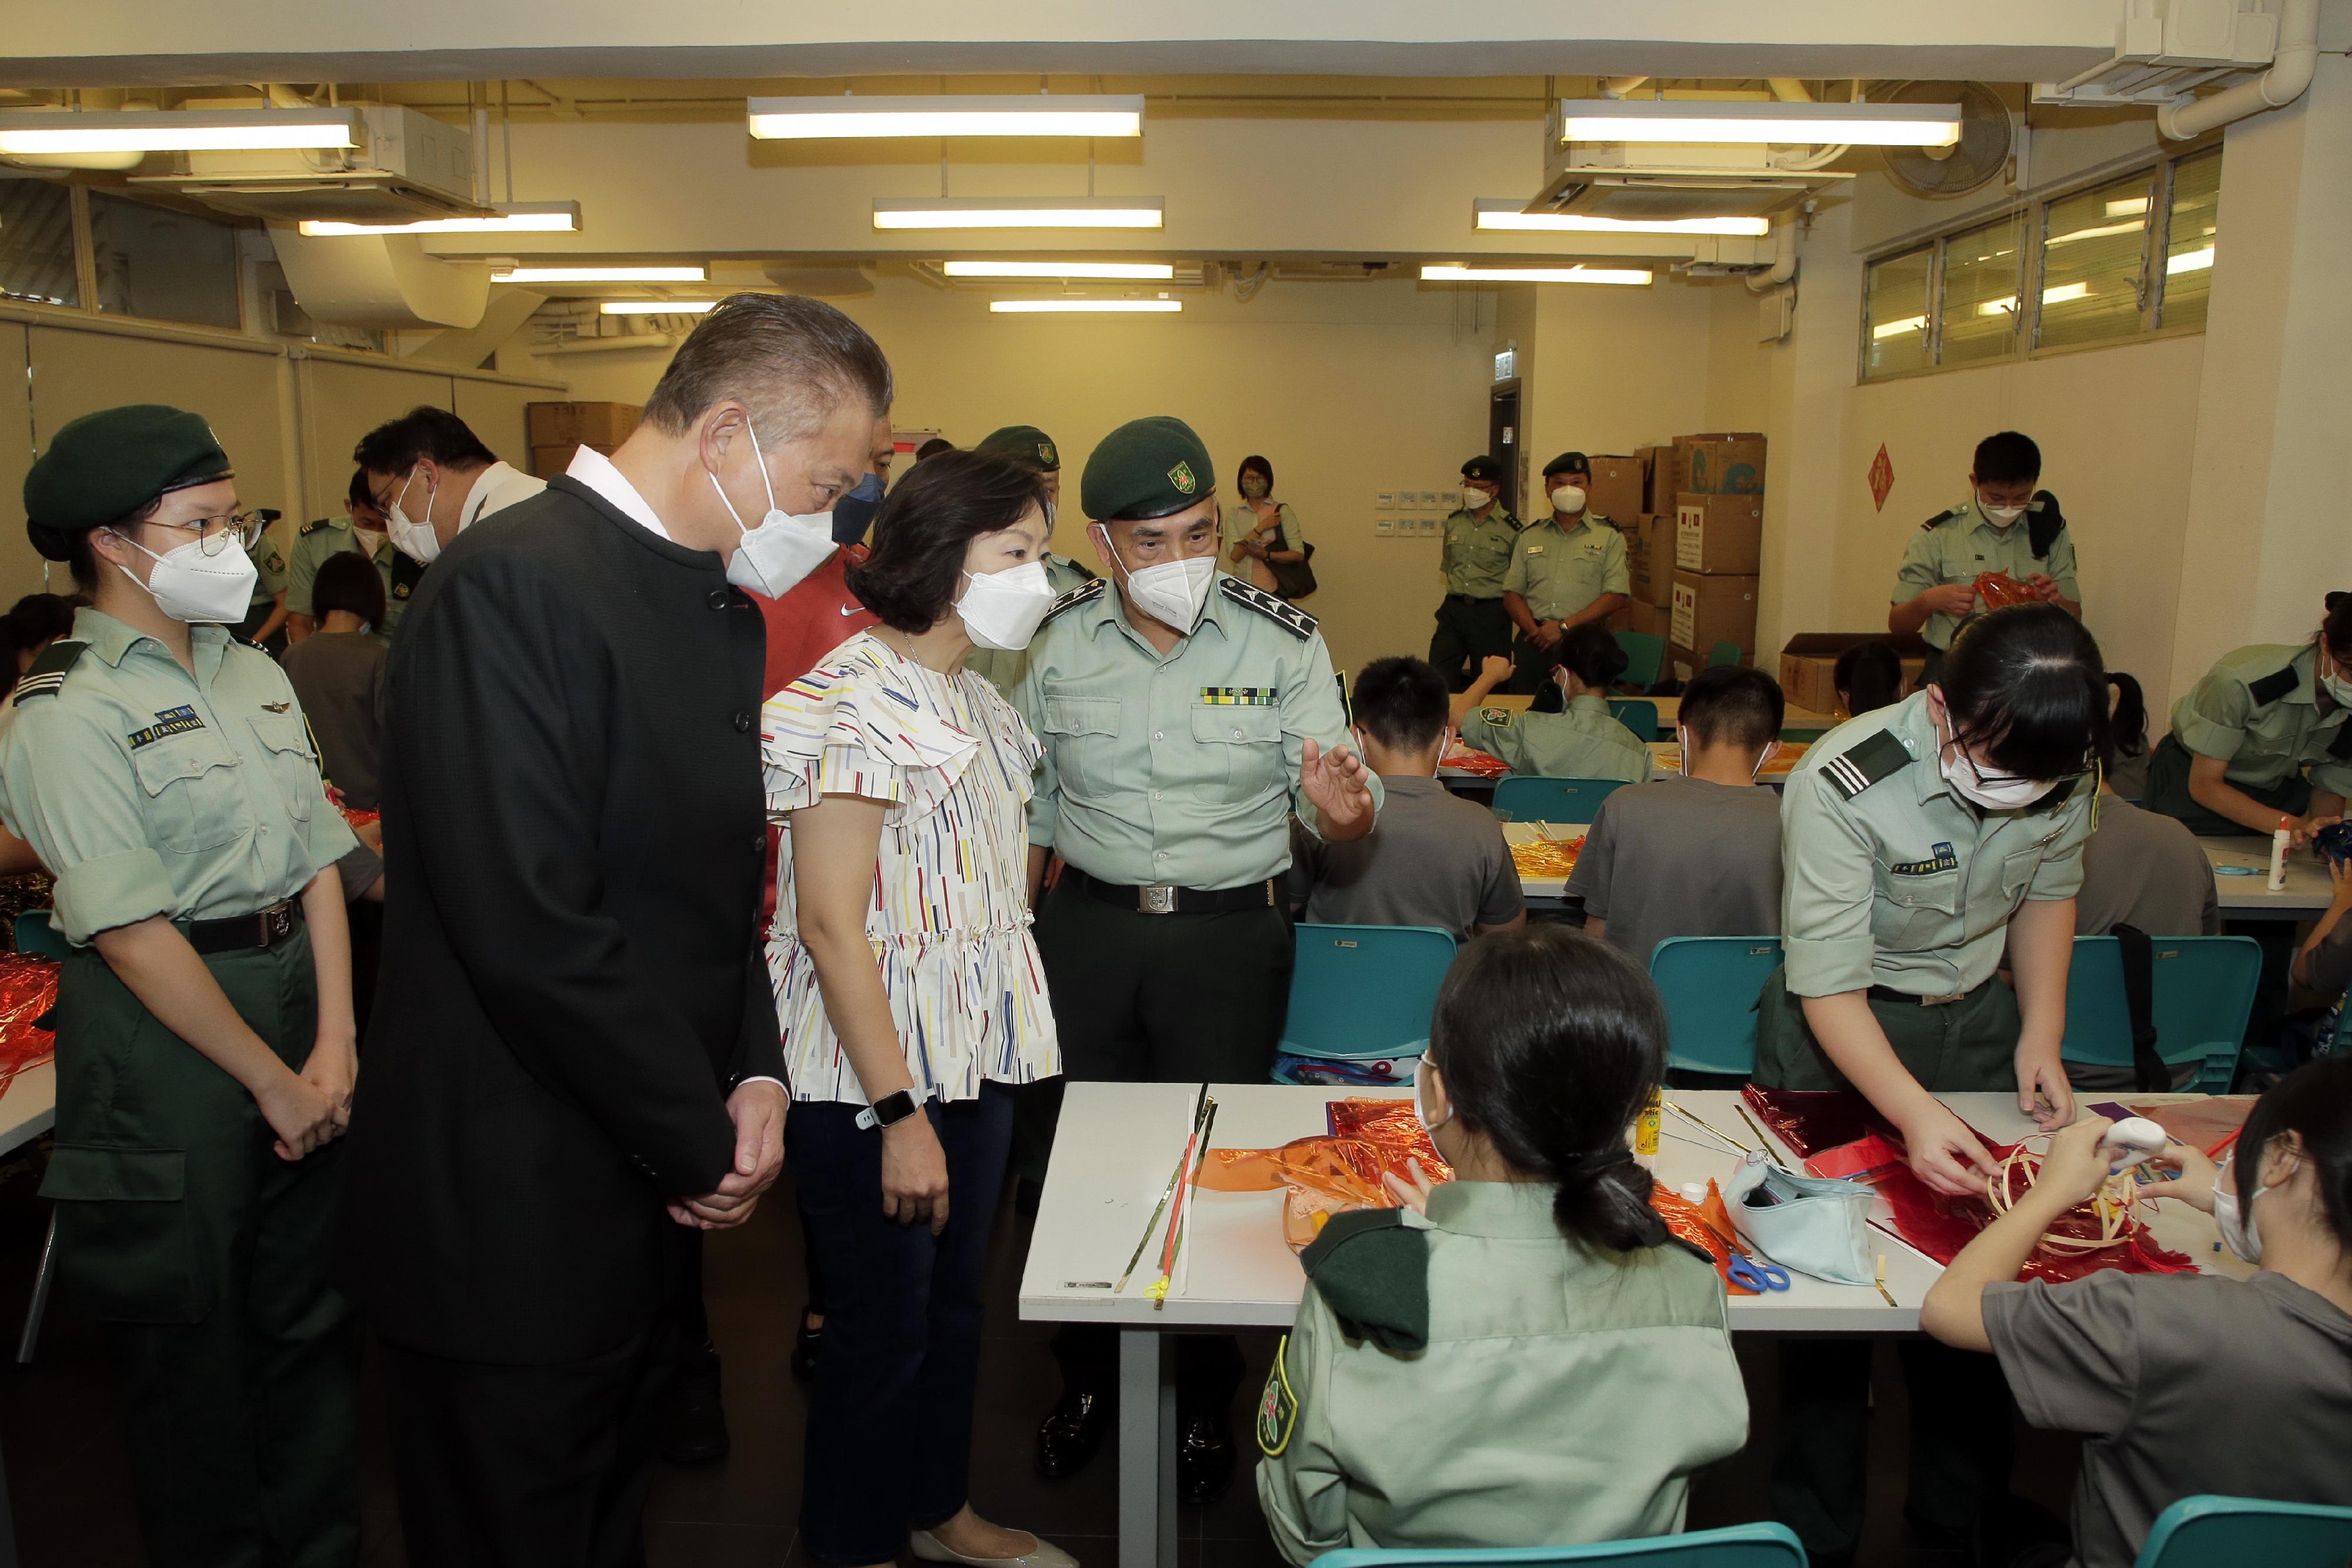 The Secretary for Home and Youth Affairs, Miss Alice Mak, today (September 10) visited the Hong Kong Army Cadets Association (HKACA). Photo shows Miss Mak (third left) watching young cadets of the HKACA making paper lantern crafts to celebrate the Mid-Autumn Festival. 




